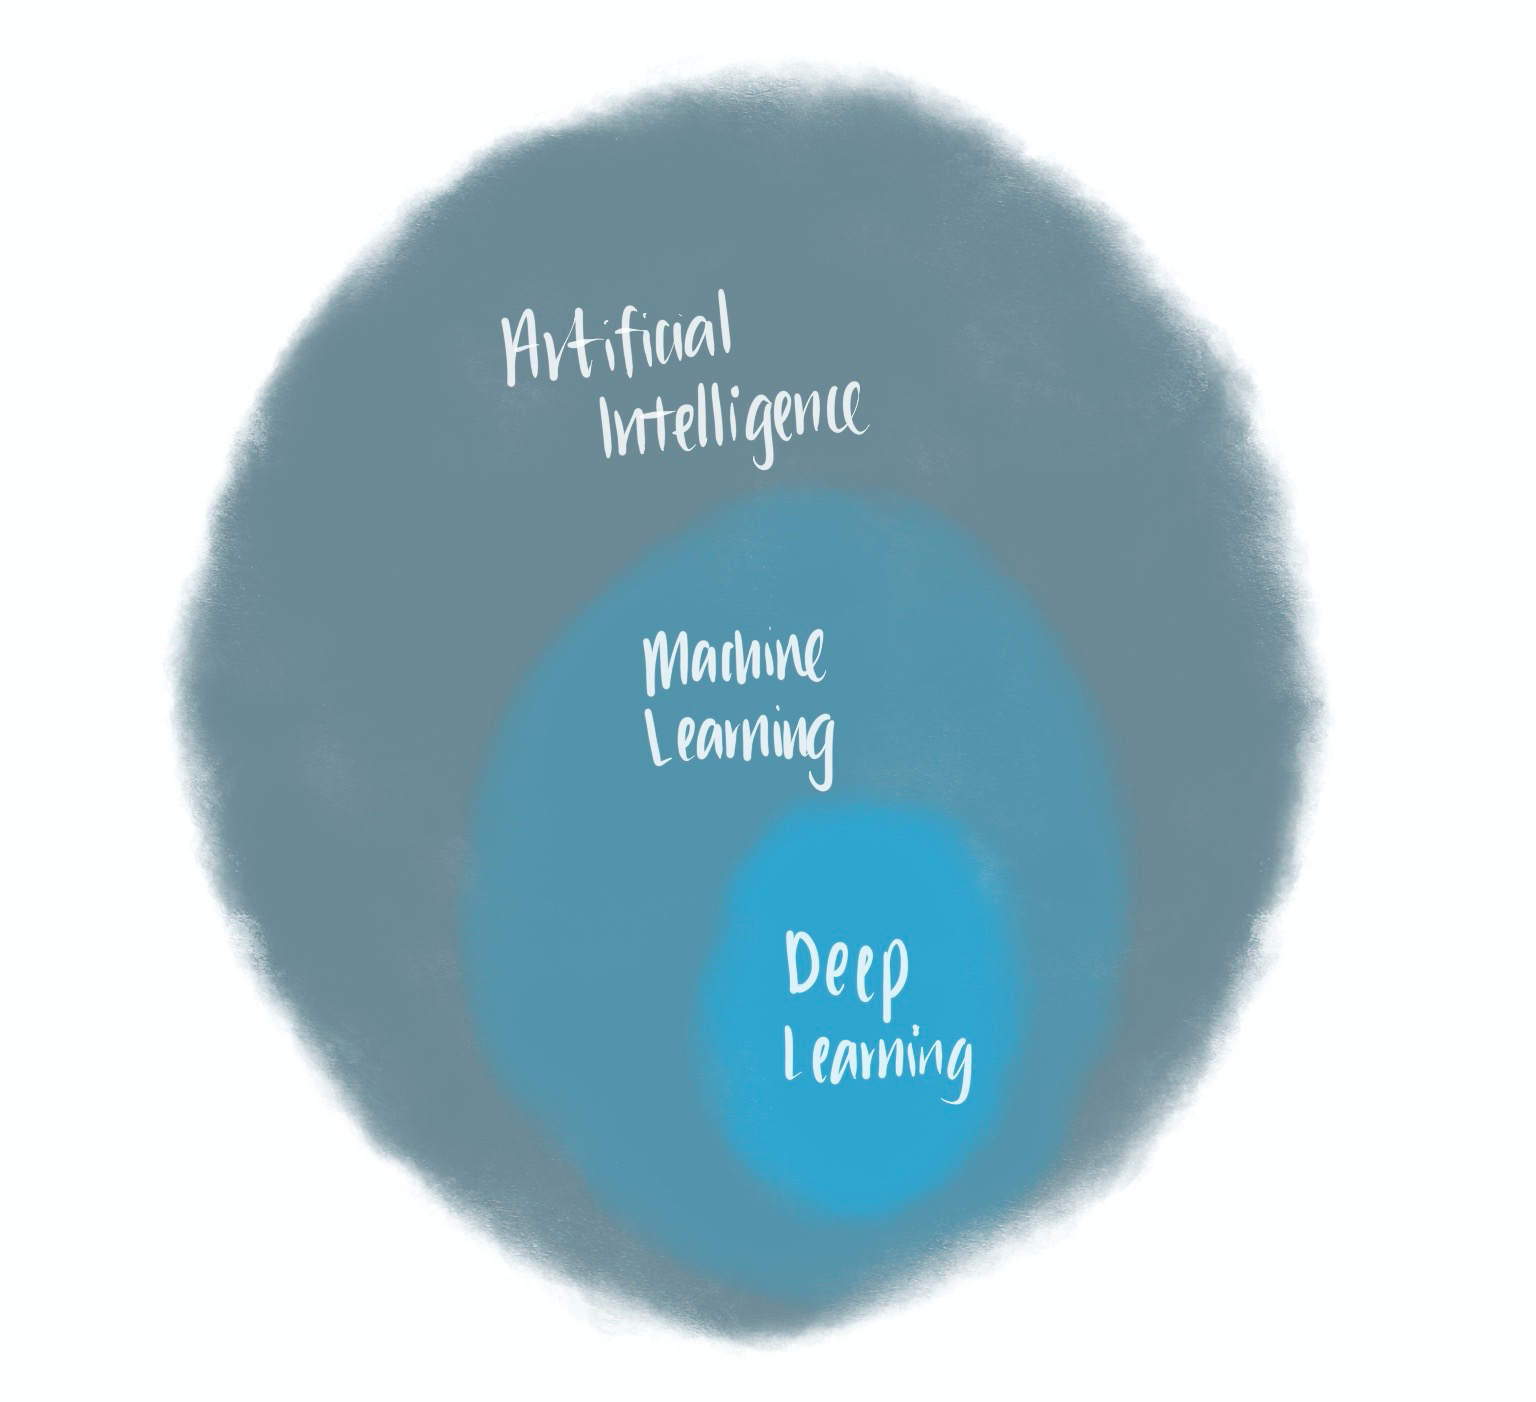 The relationship between artificial intelligence (AI), machine learning (ML) and deep learning (neural networks)